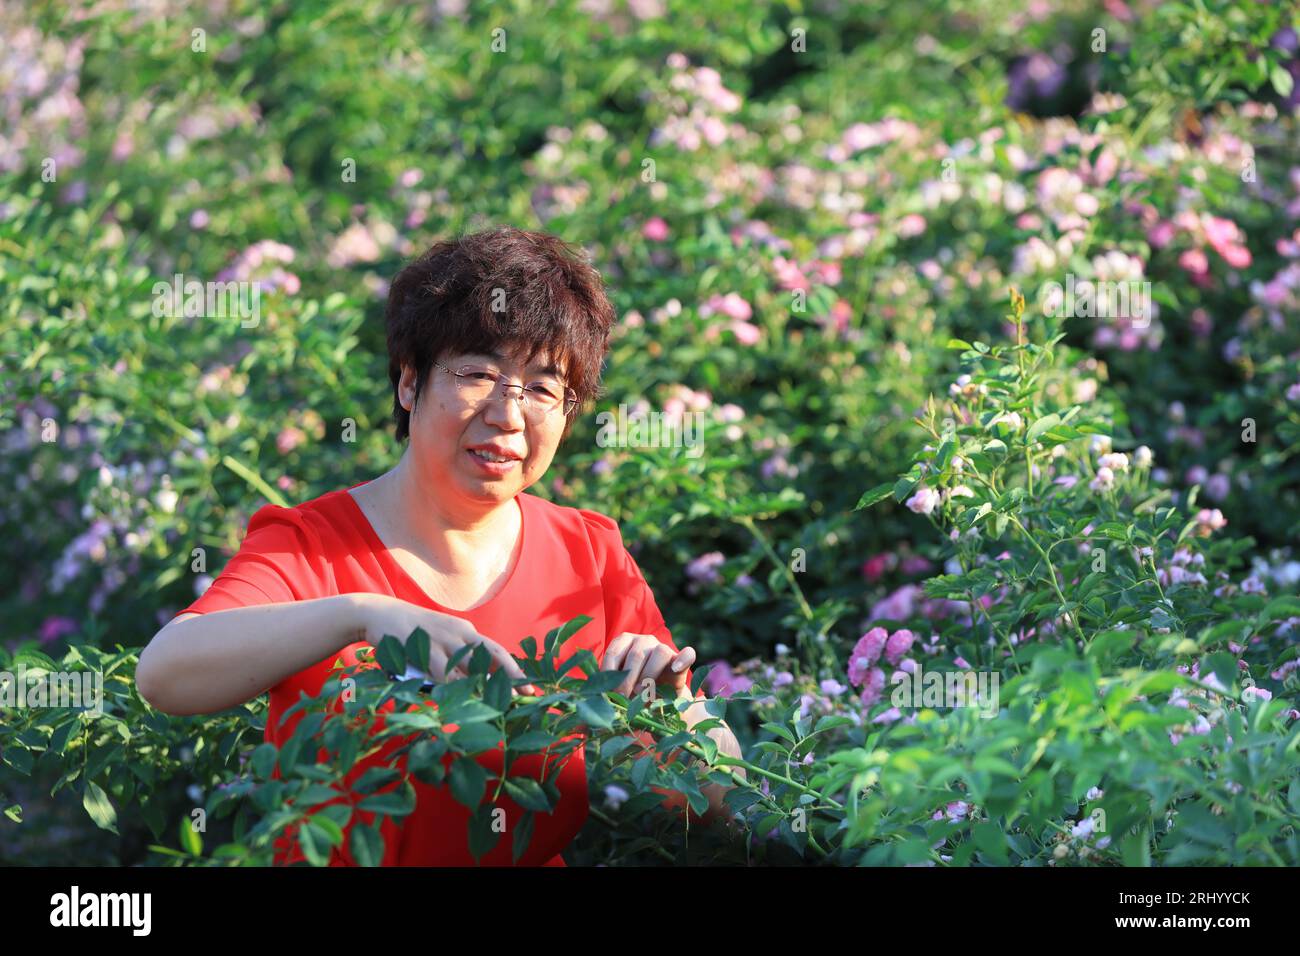 Luannan County - June 1, 2019: A lady is enjoying roses, Luannan County, Hebei Province, China Stock Photo